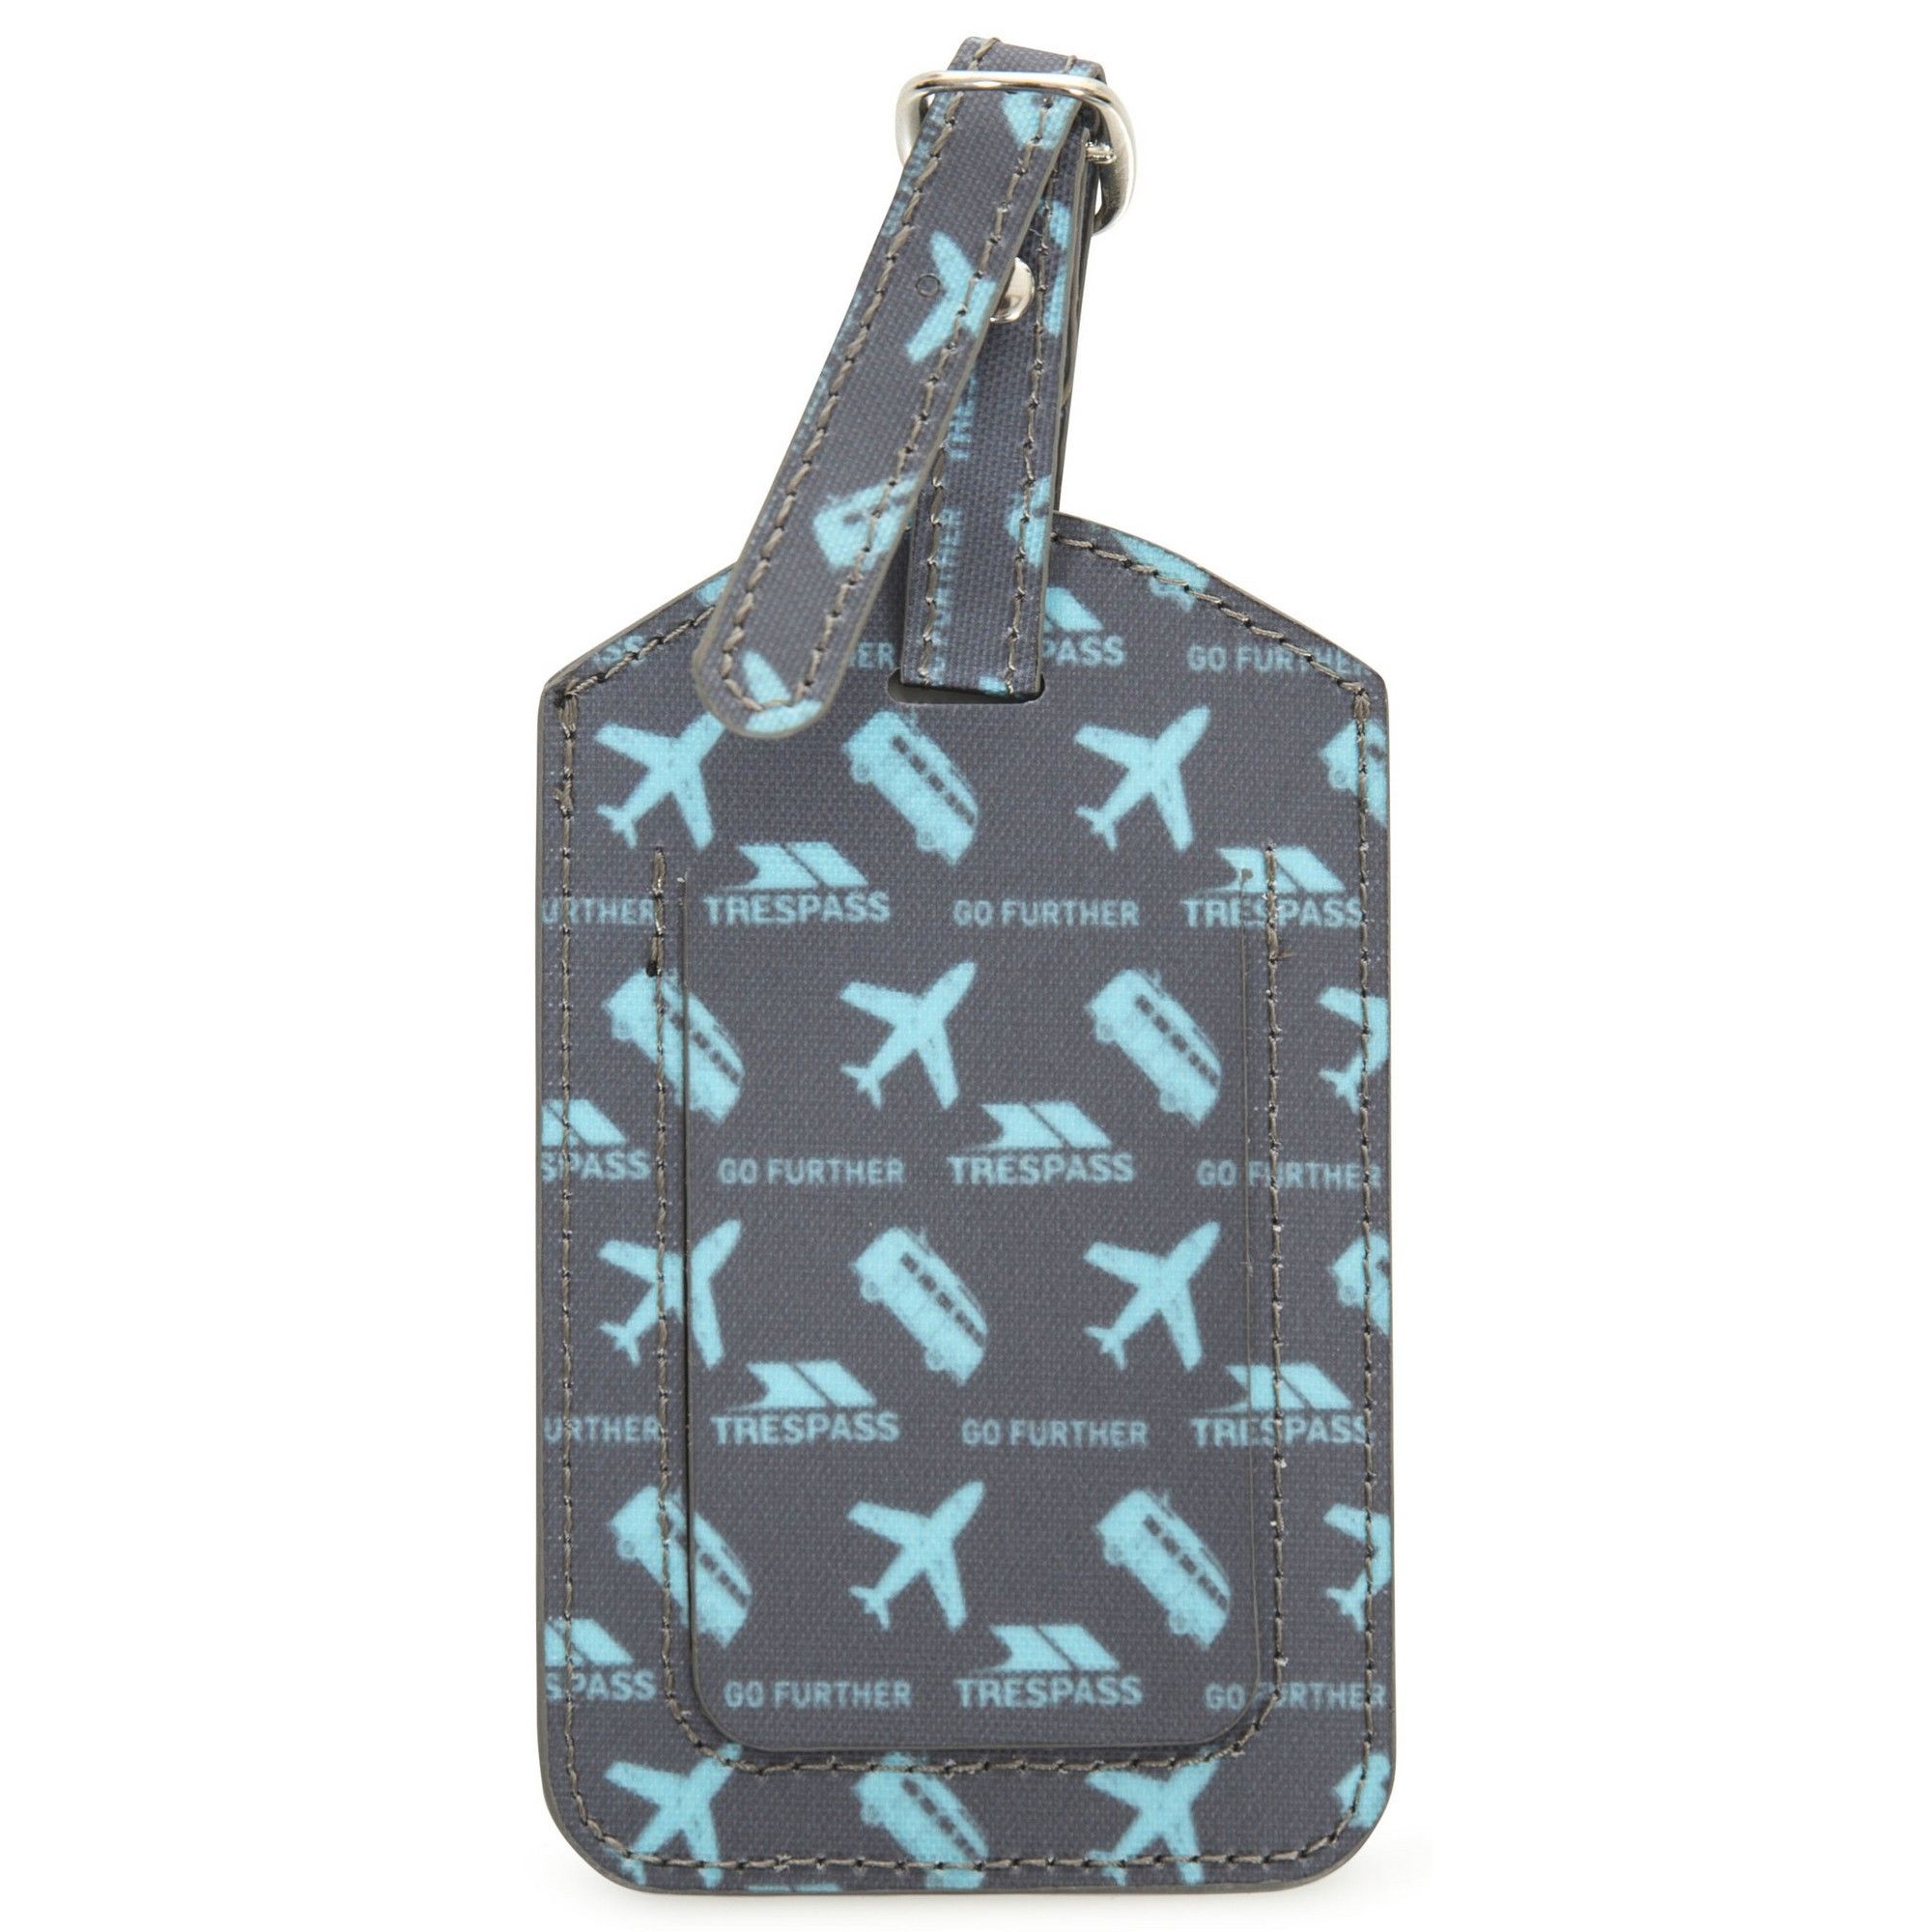 PU with bonded textile print. Name, address and contact panel. Security flap. Buckled strap. Display sleeve.